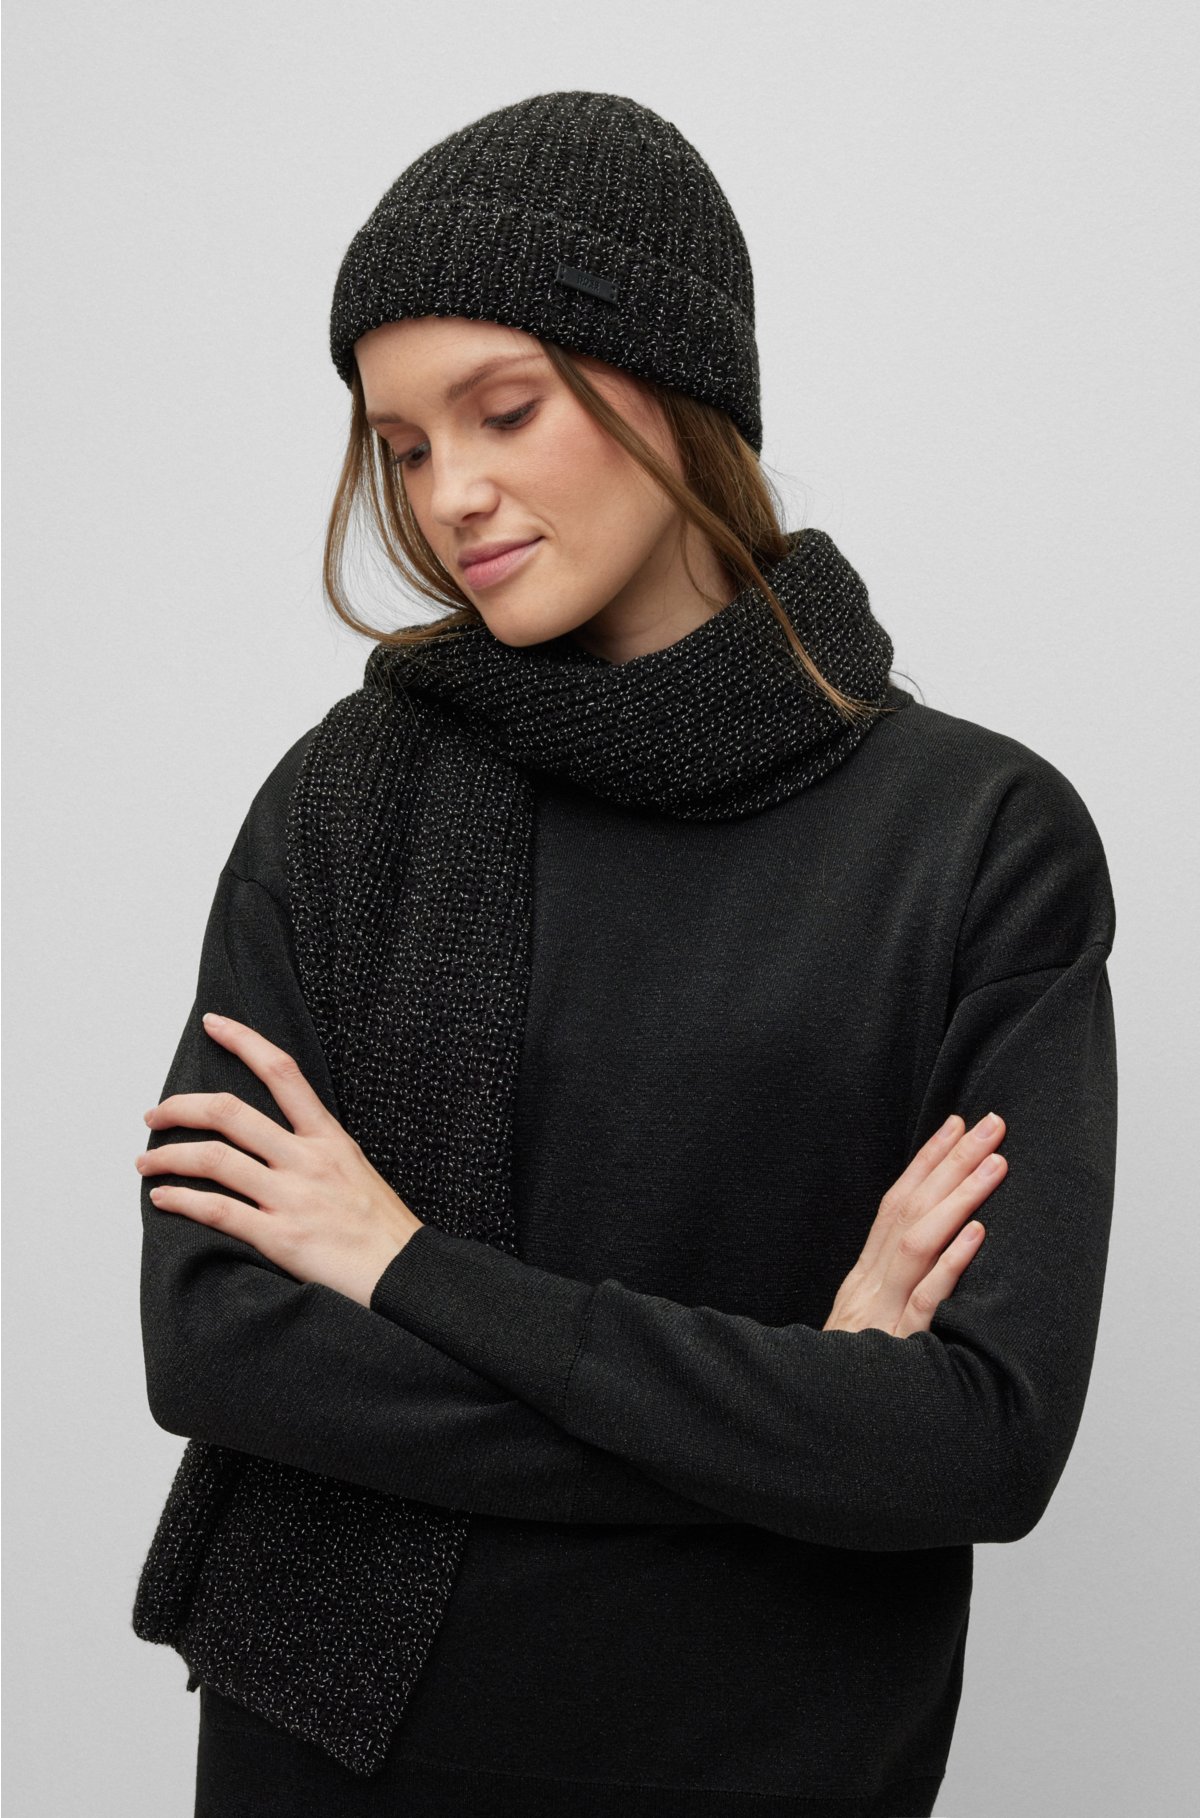 BOSS - Beanie hat and scarf set in metallised fabric